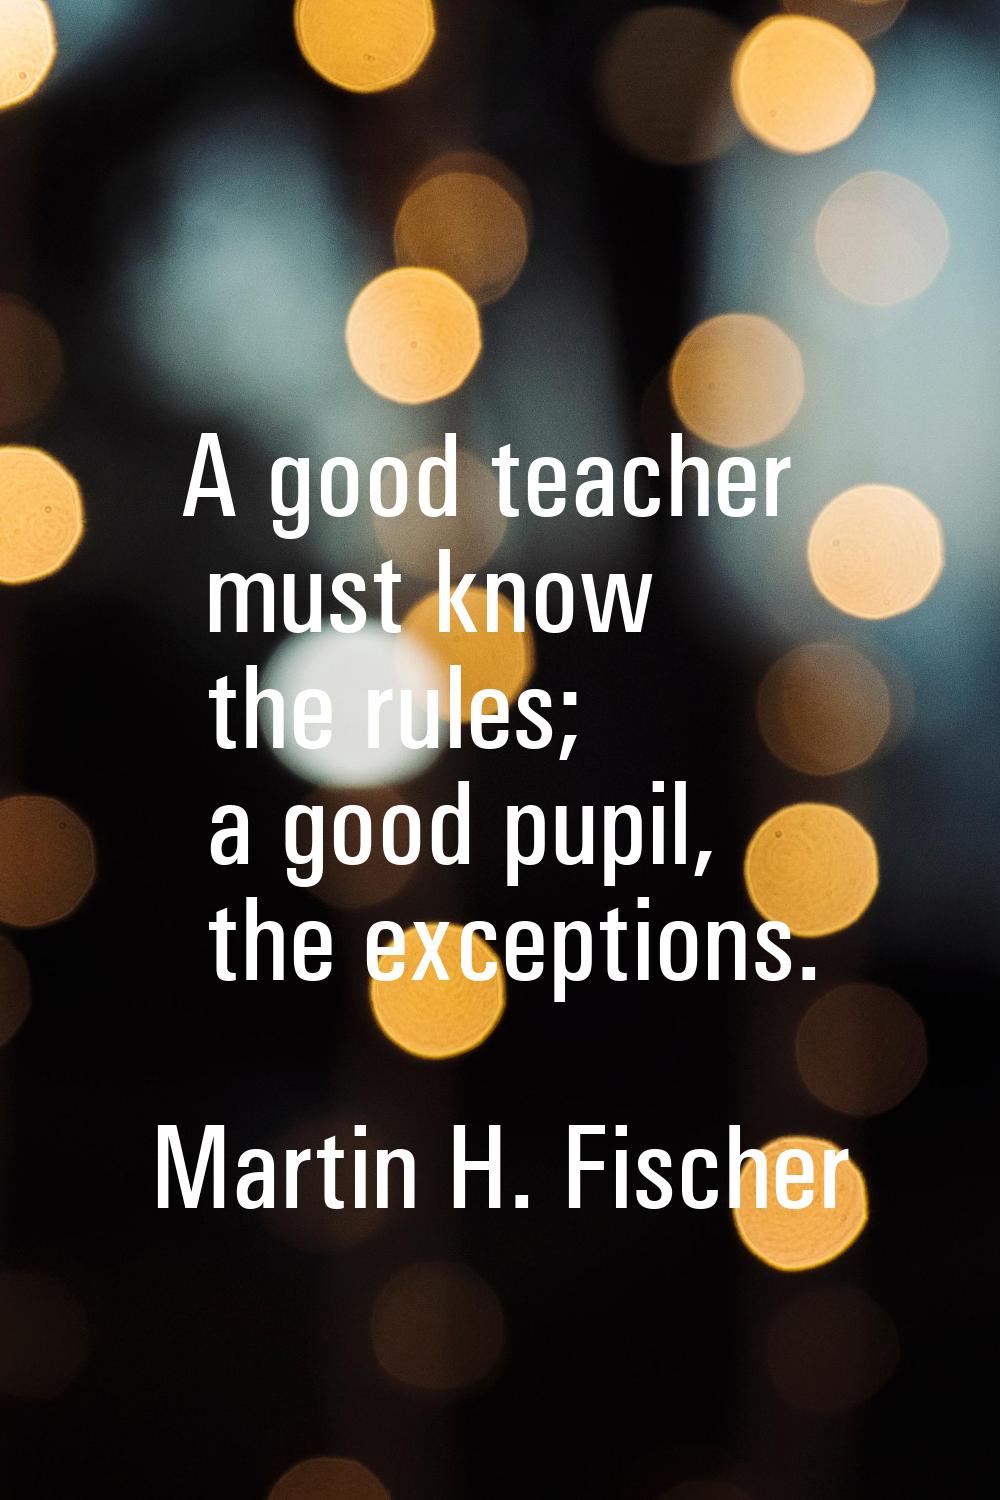 A good teacher must know the rules; a good pupil, the exceptions.